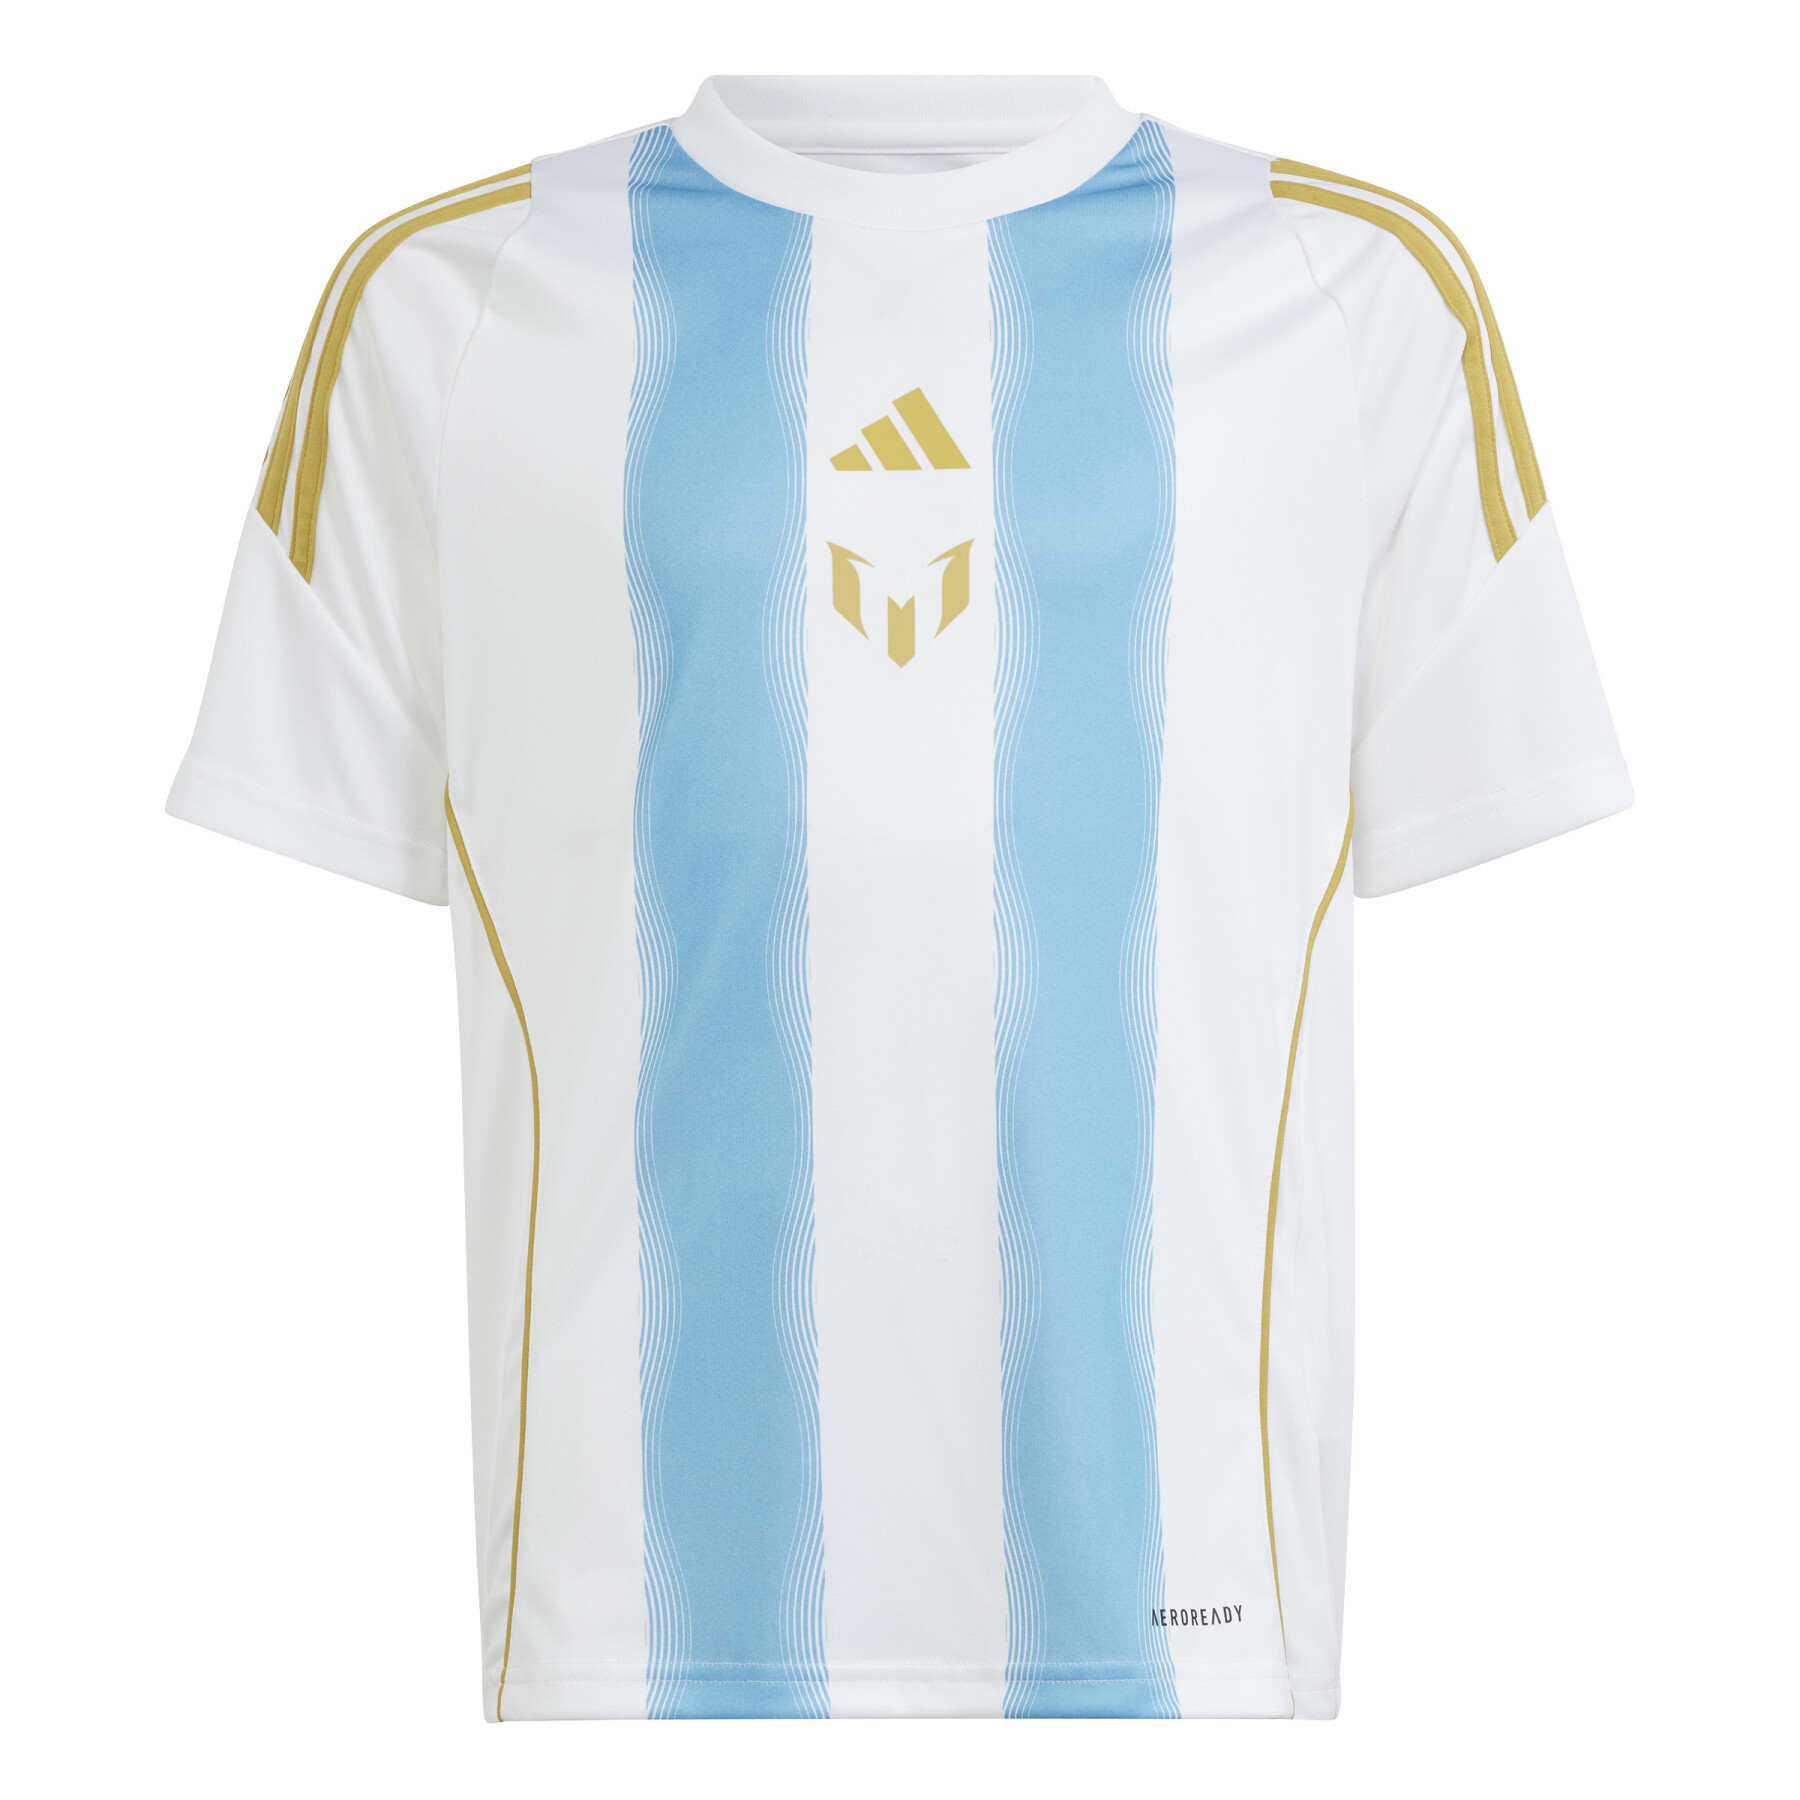 Maillot enfant adidas Pitch 2 Street Messi